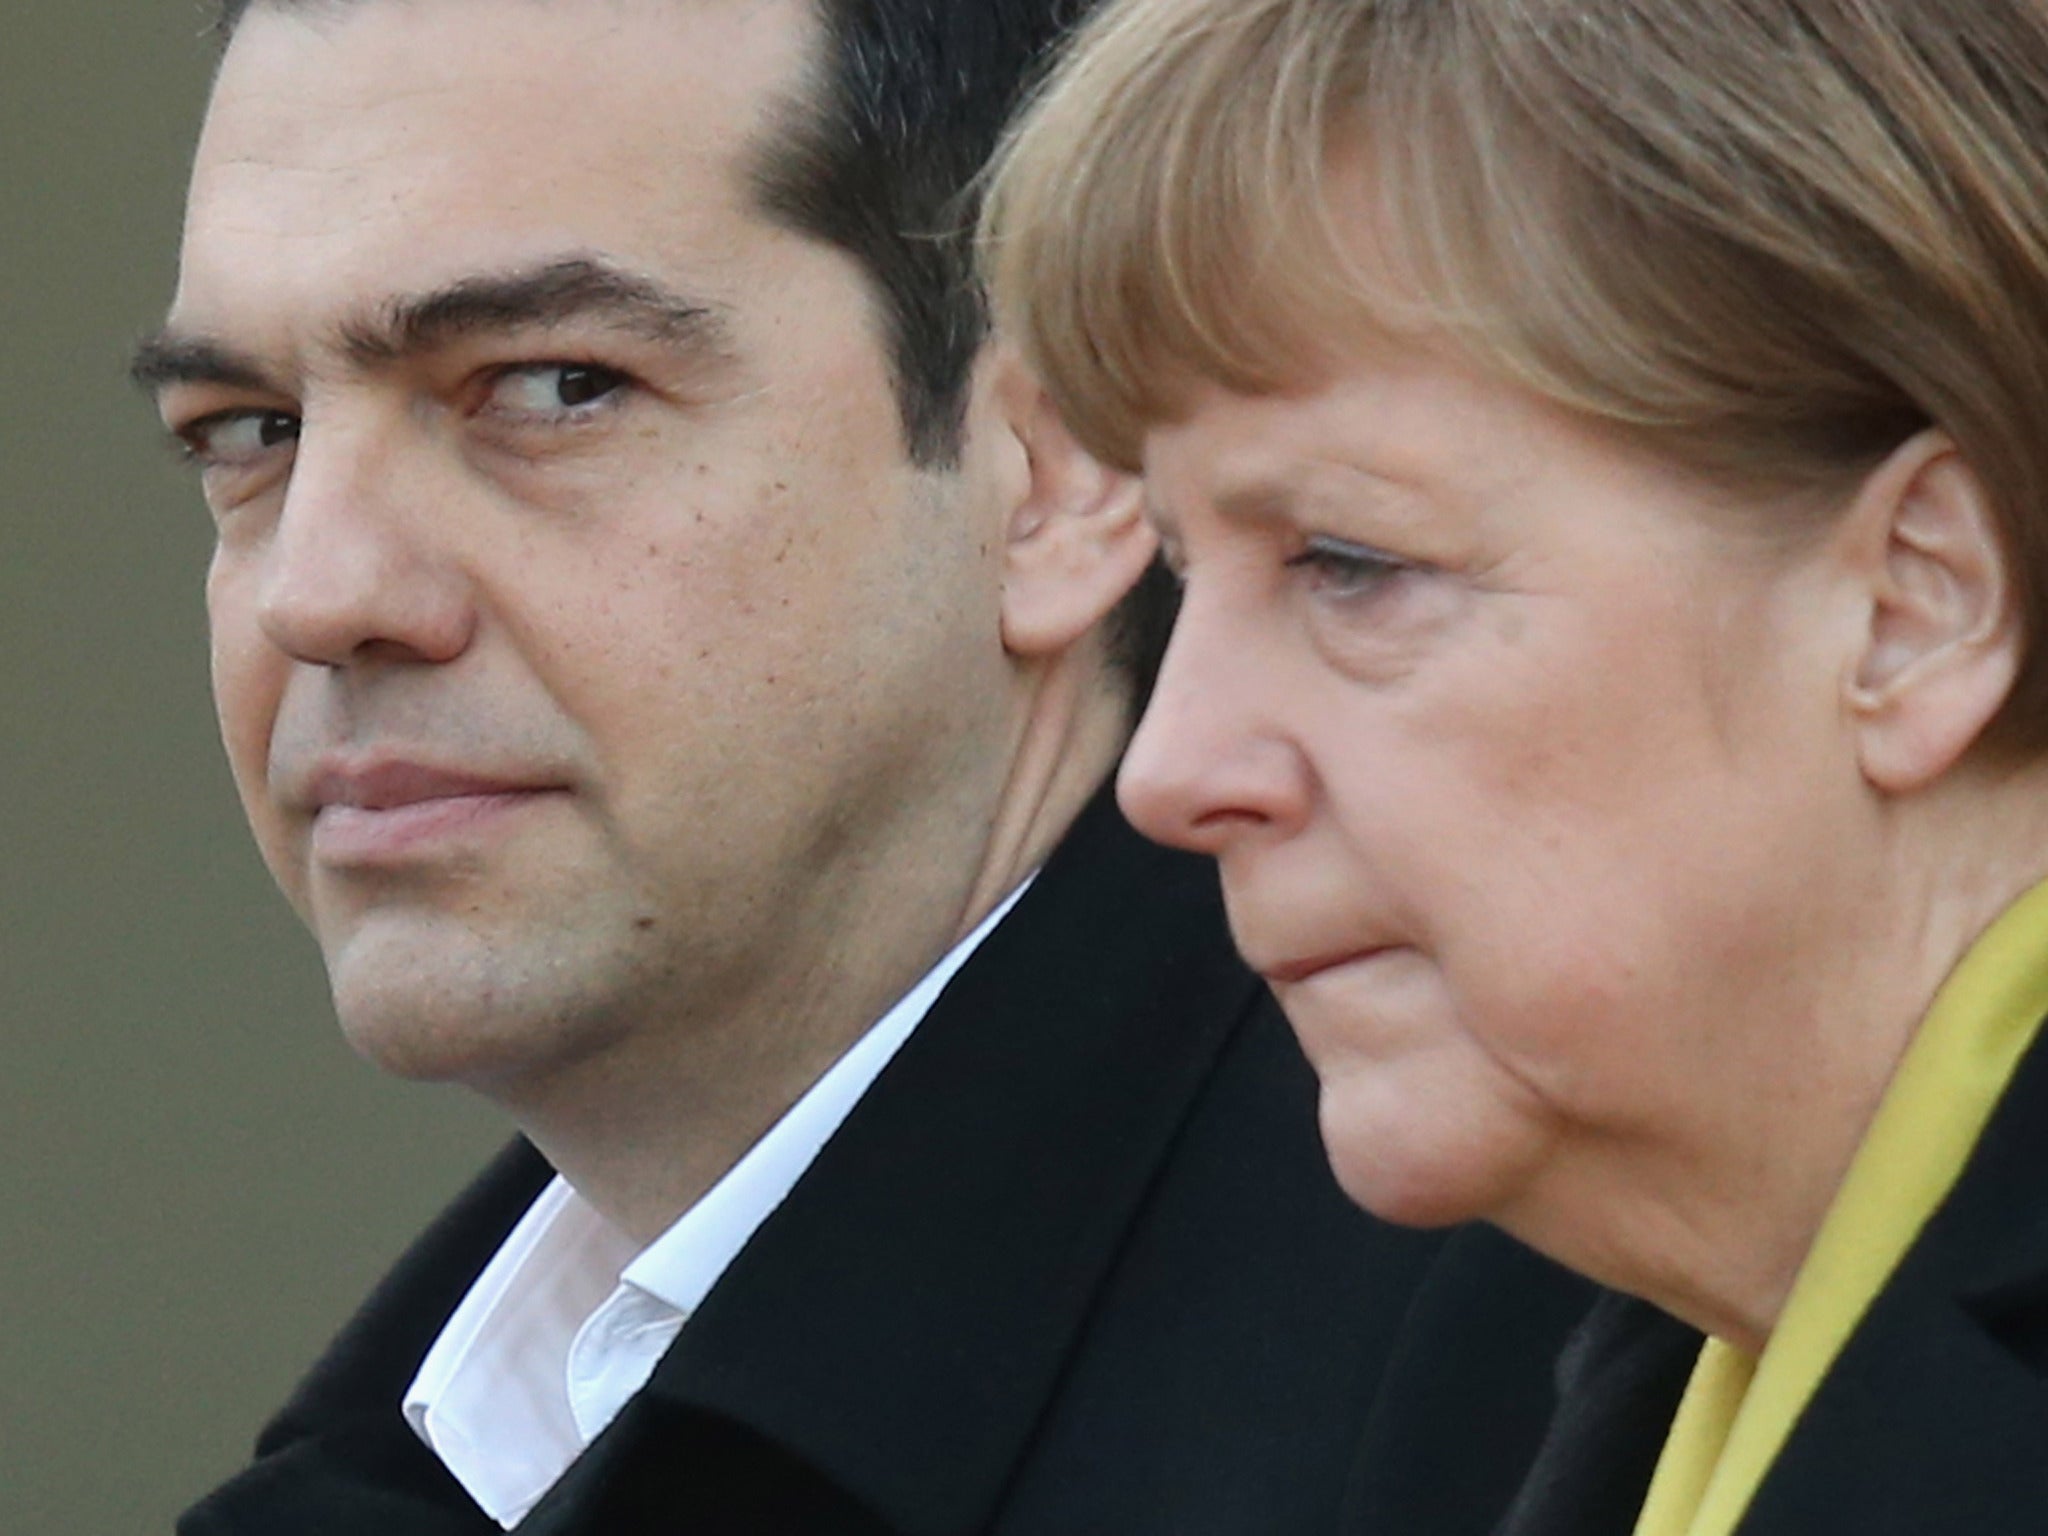 Germany has taken an increasingly tough line on Greece, demanding guarantees Athens will observe proposed austerity measures